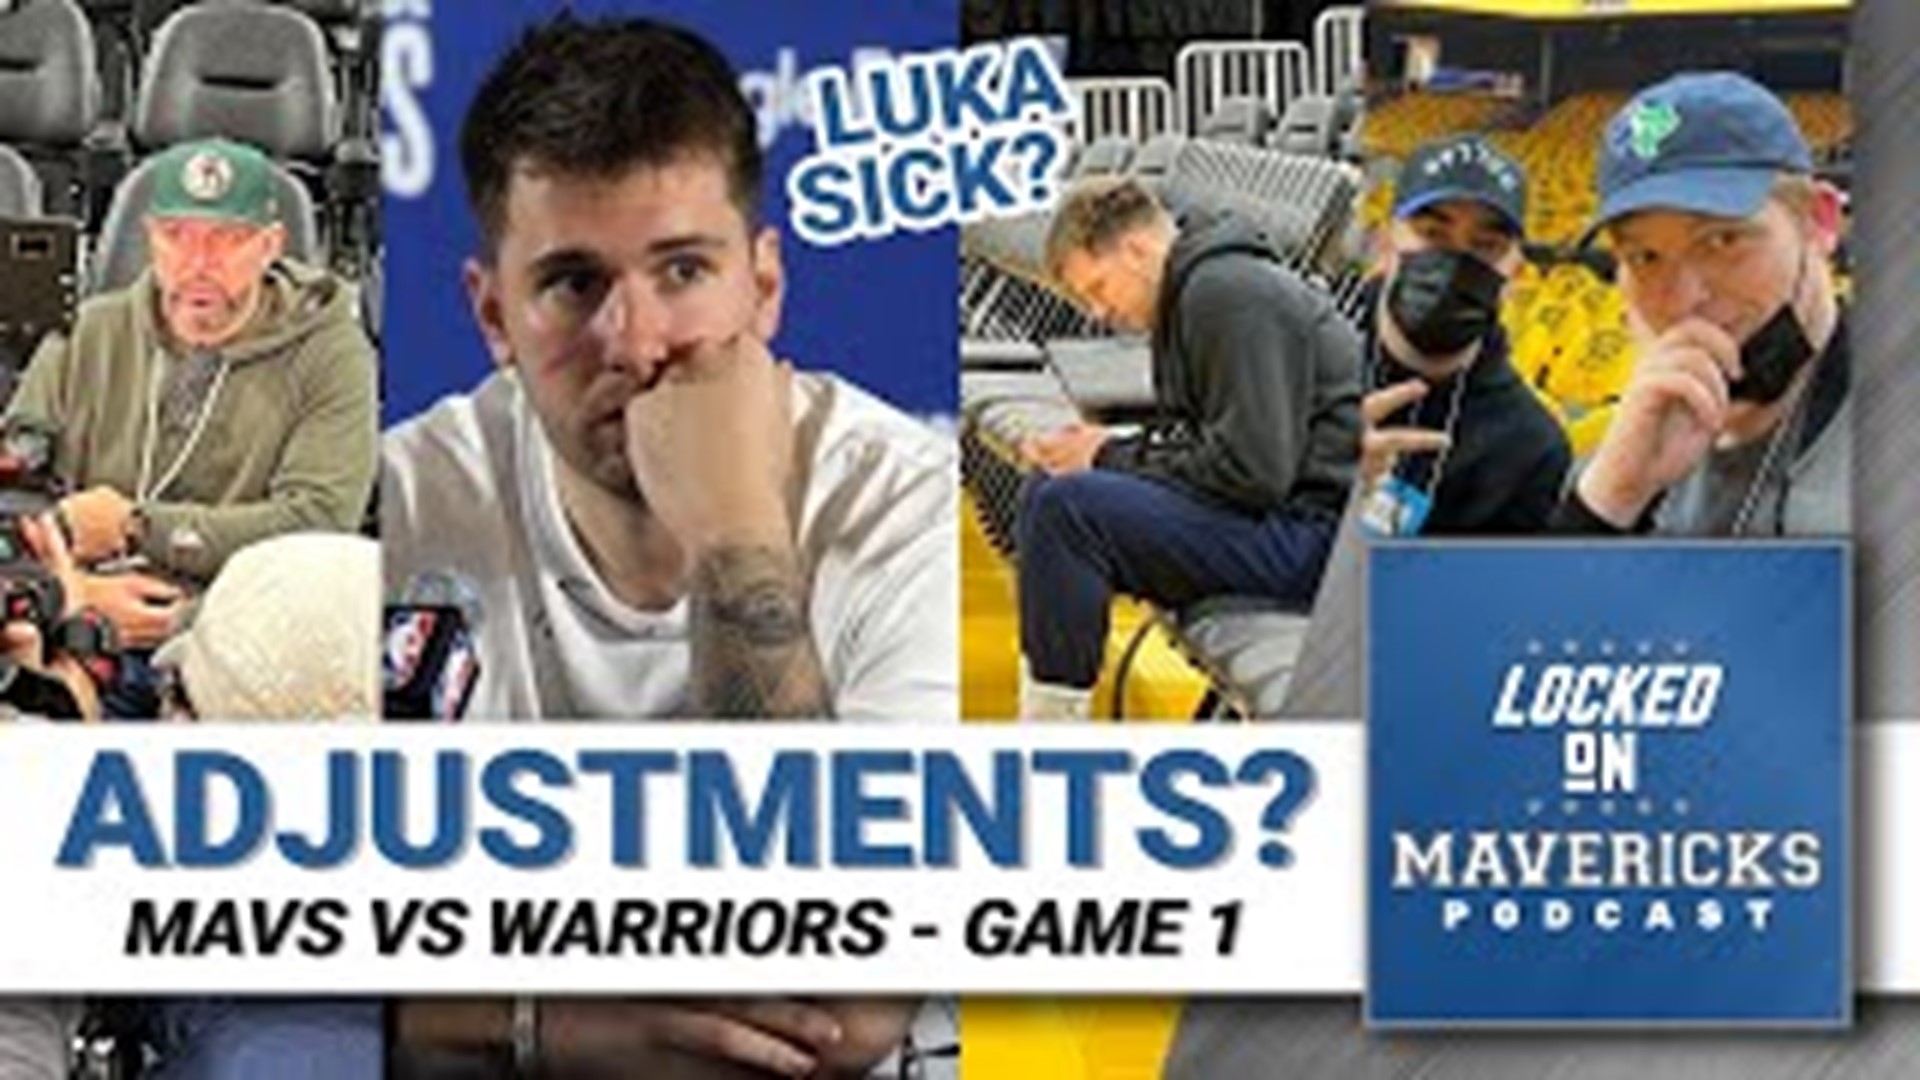 Nick Angstadt & Isaac Harris discuss the rumor that Luka Doncic was ill the night before Game 1 and what Luka was doing after practice that suggested as much.